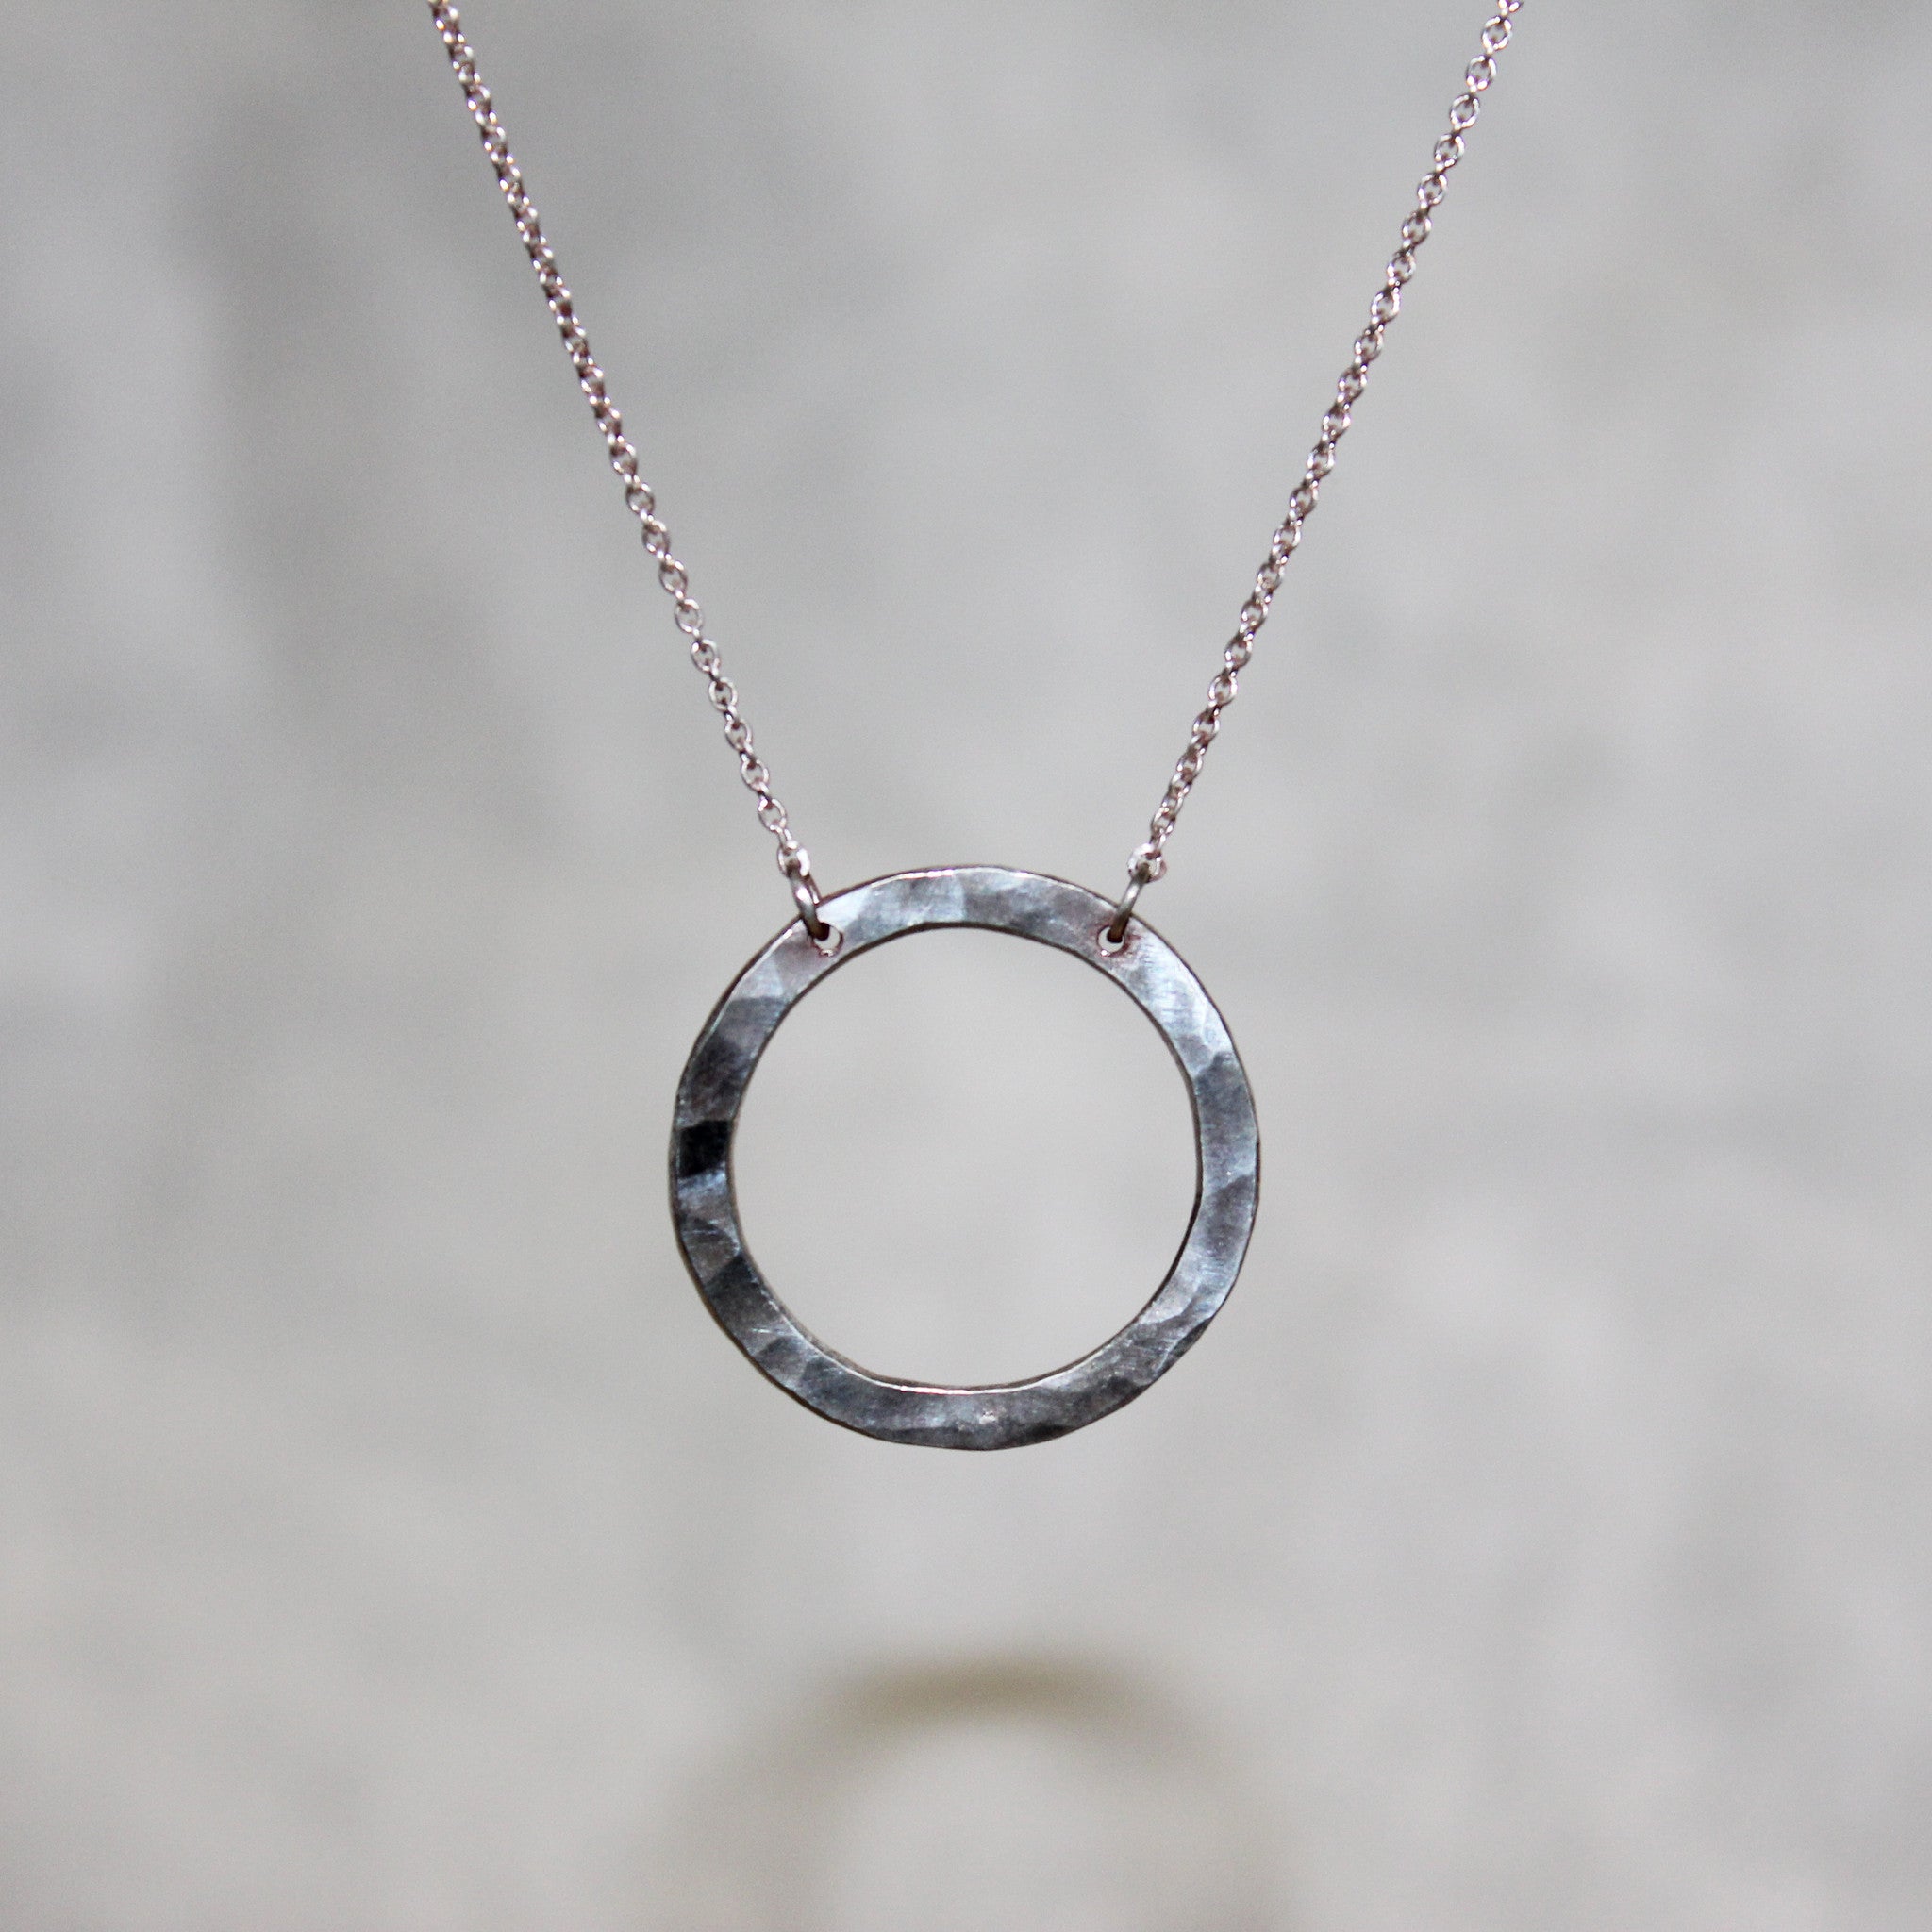 Suspended Comet Necklace